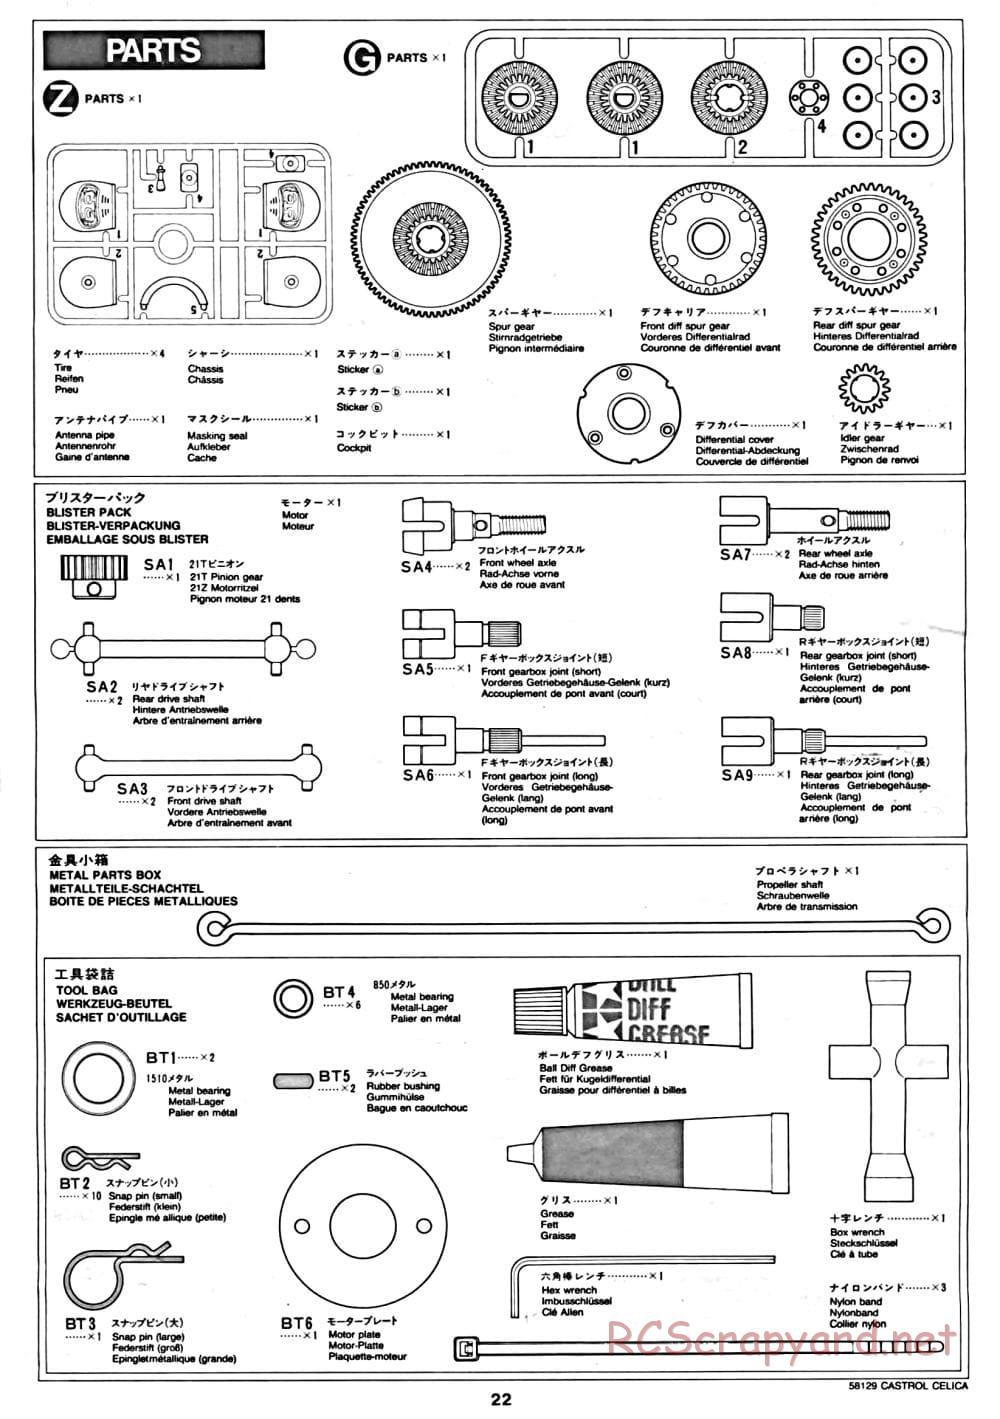 Tamiya - Castrol Celica 93 Monte-Carlo - TA-02 Chassis - Manual - Page 22